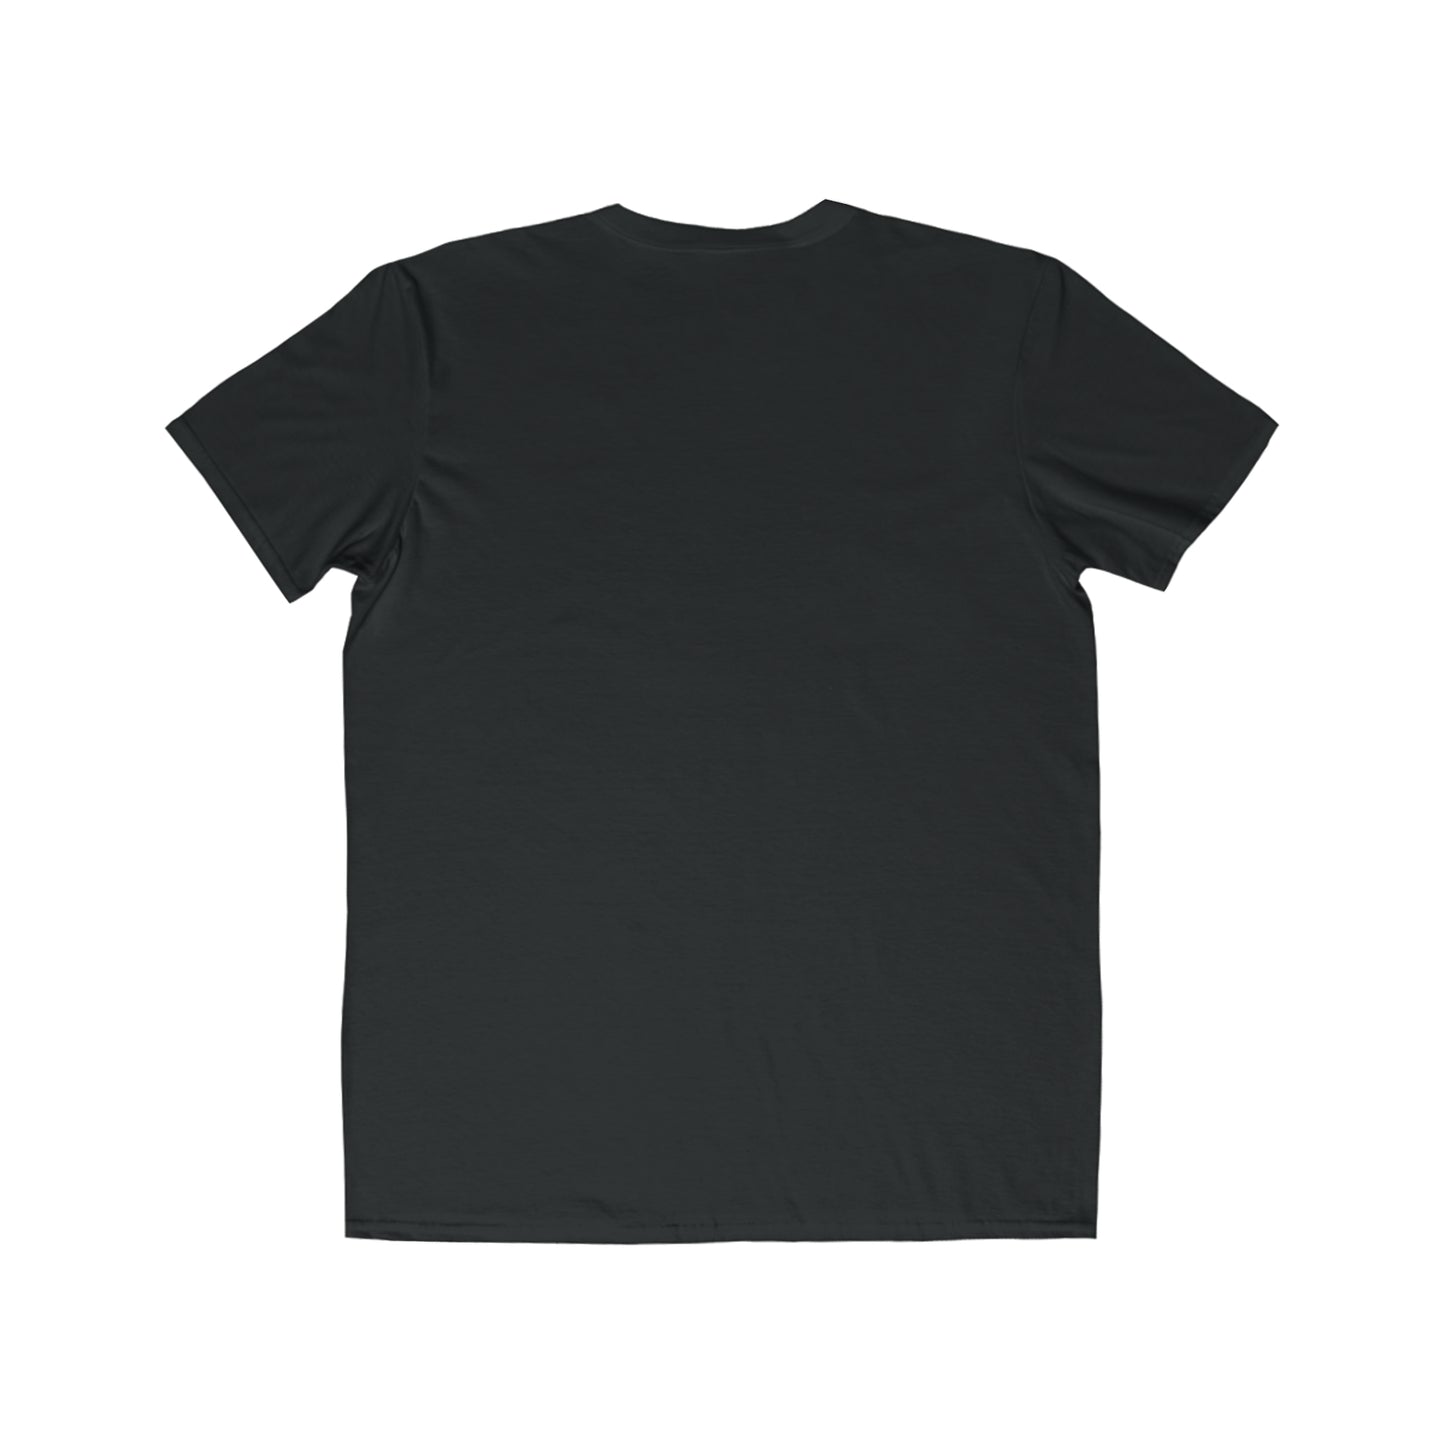 12 New Chapters Men's Lightweight Fashion Tee